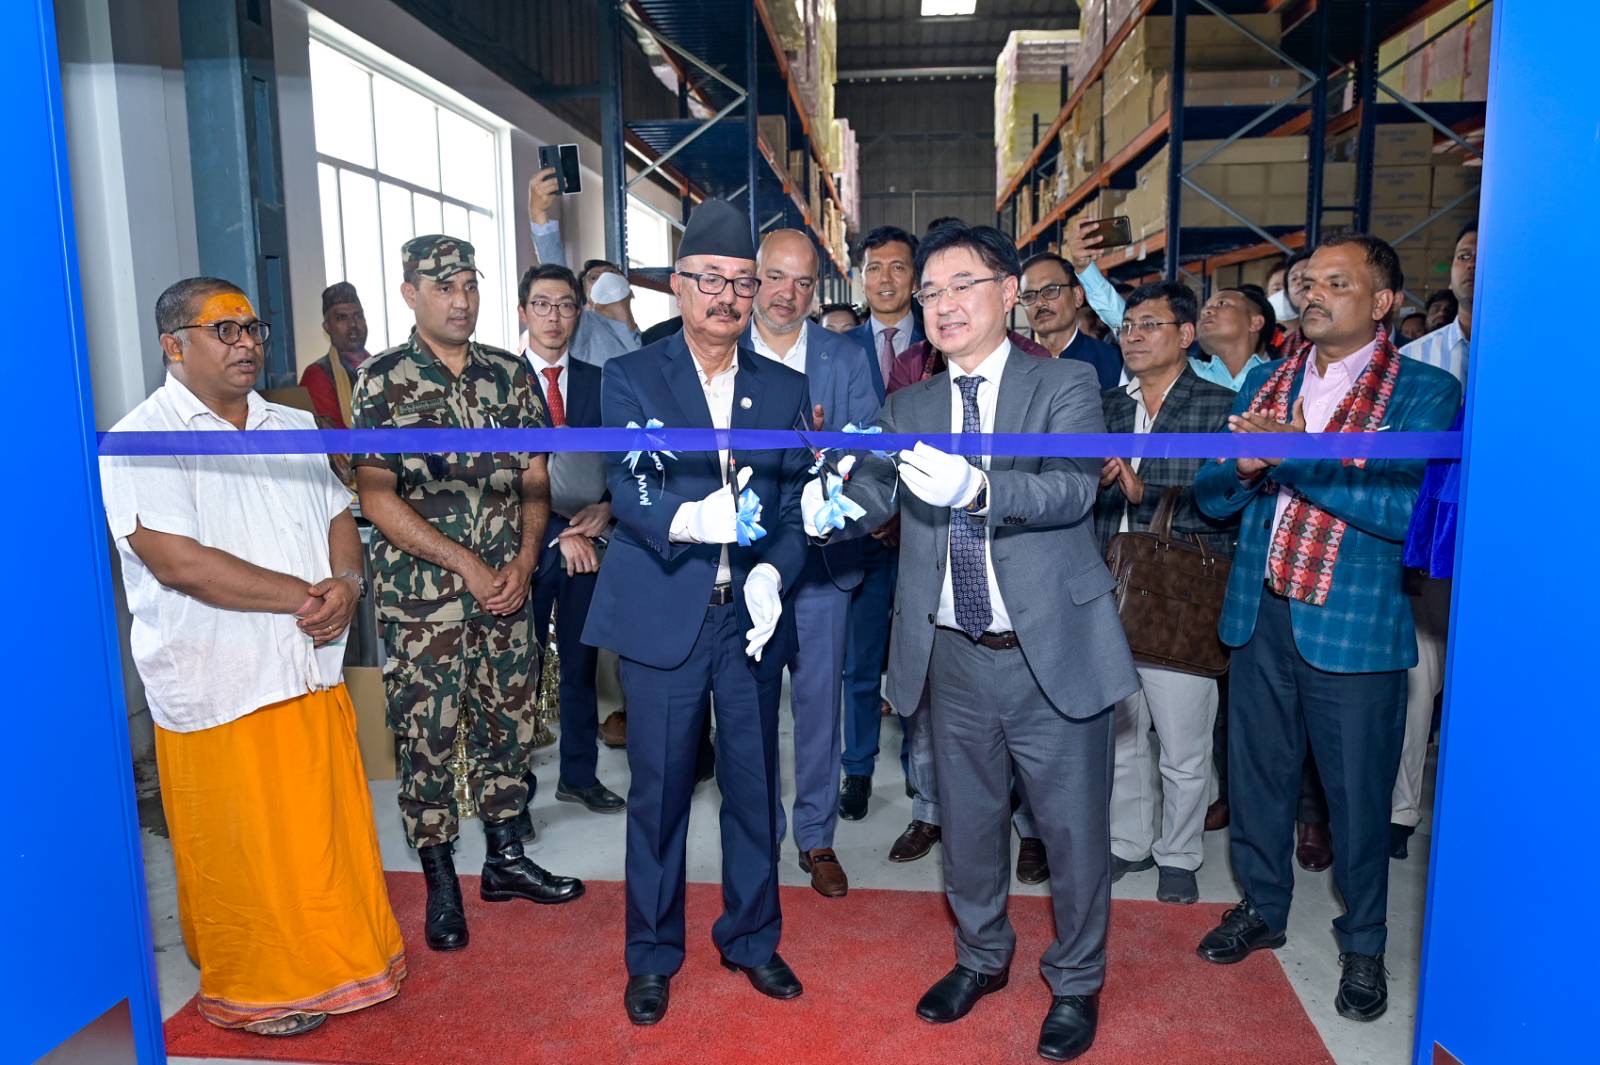 Hon'ble Minister Ramesh Rijal, Ministry of Industry, Commerce, and Supplies & Mr. J.B. Park, President & CEO, Samsung Southwest Asia, jointly inaugurating Samsung TV factory